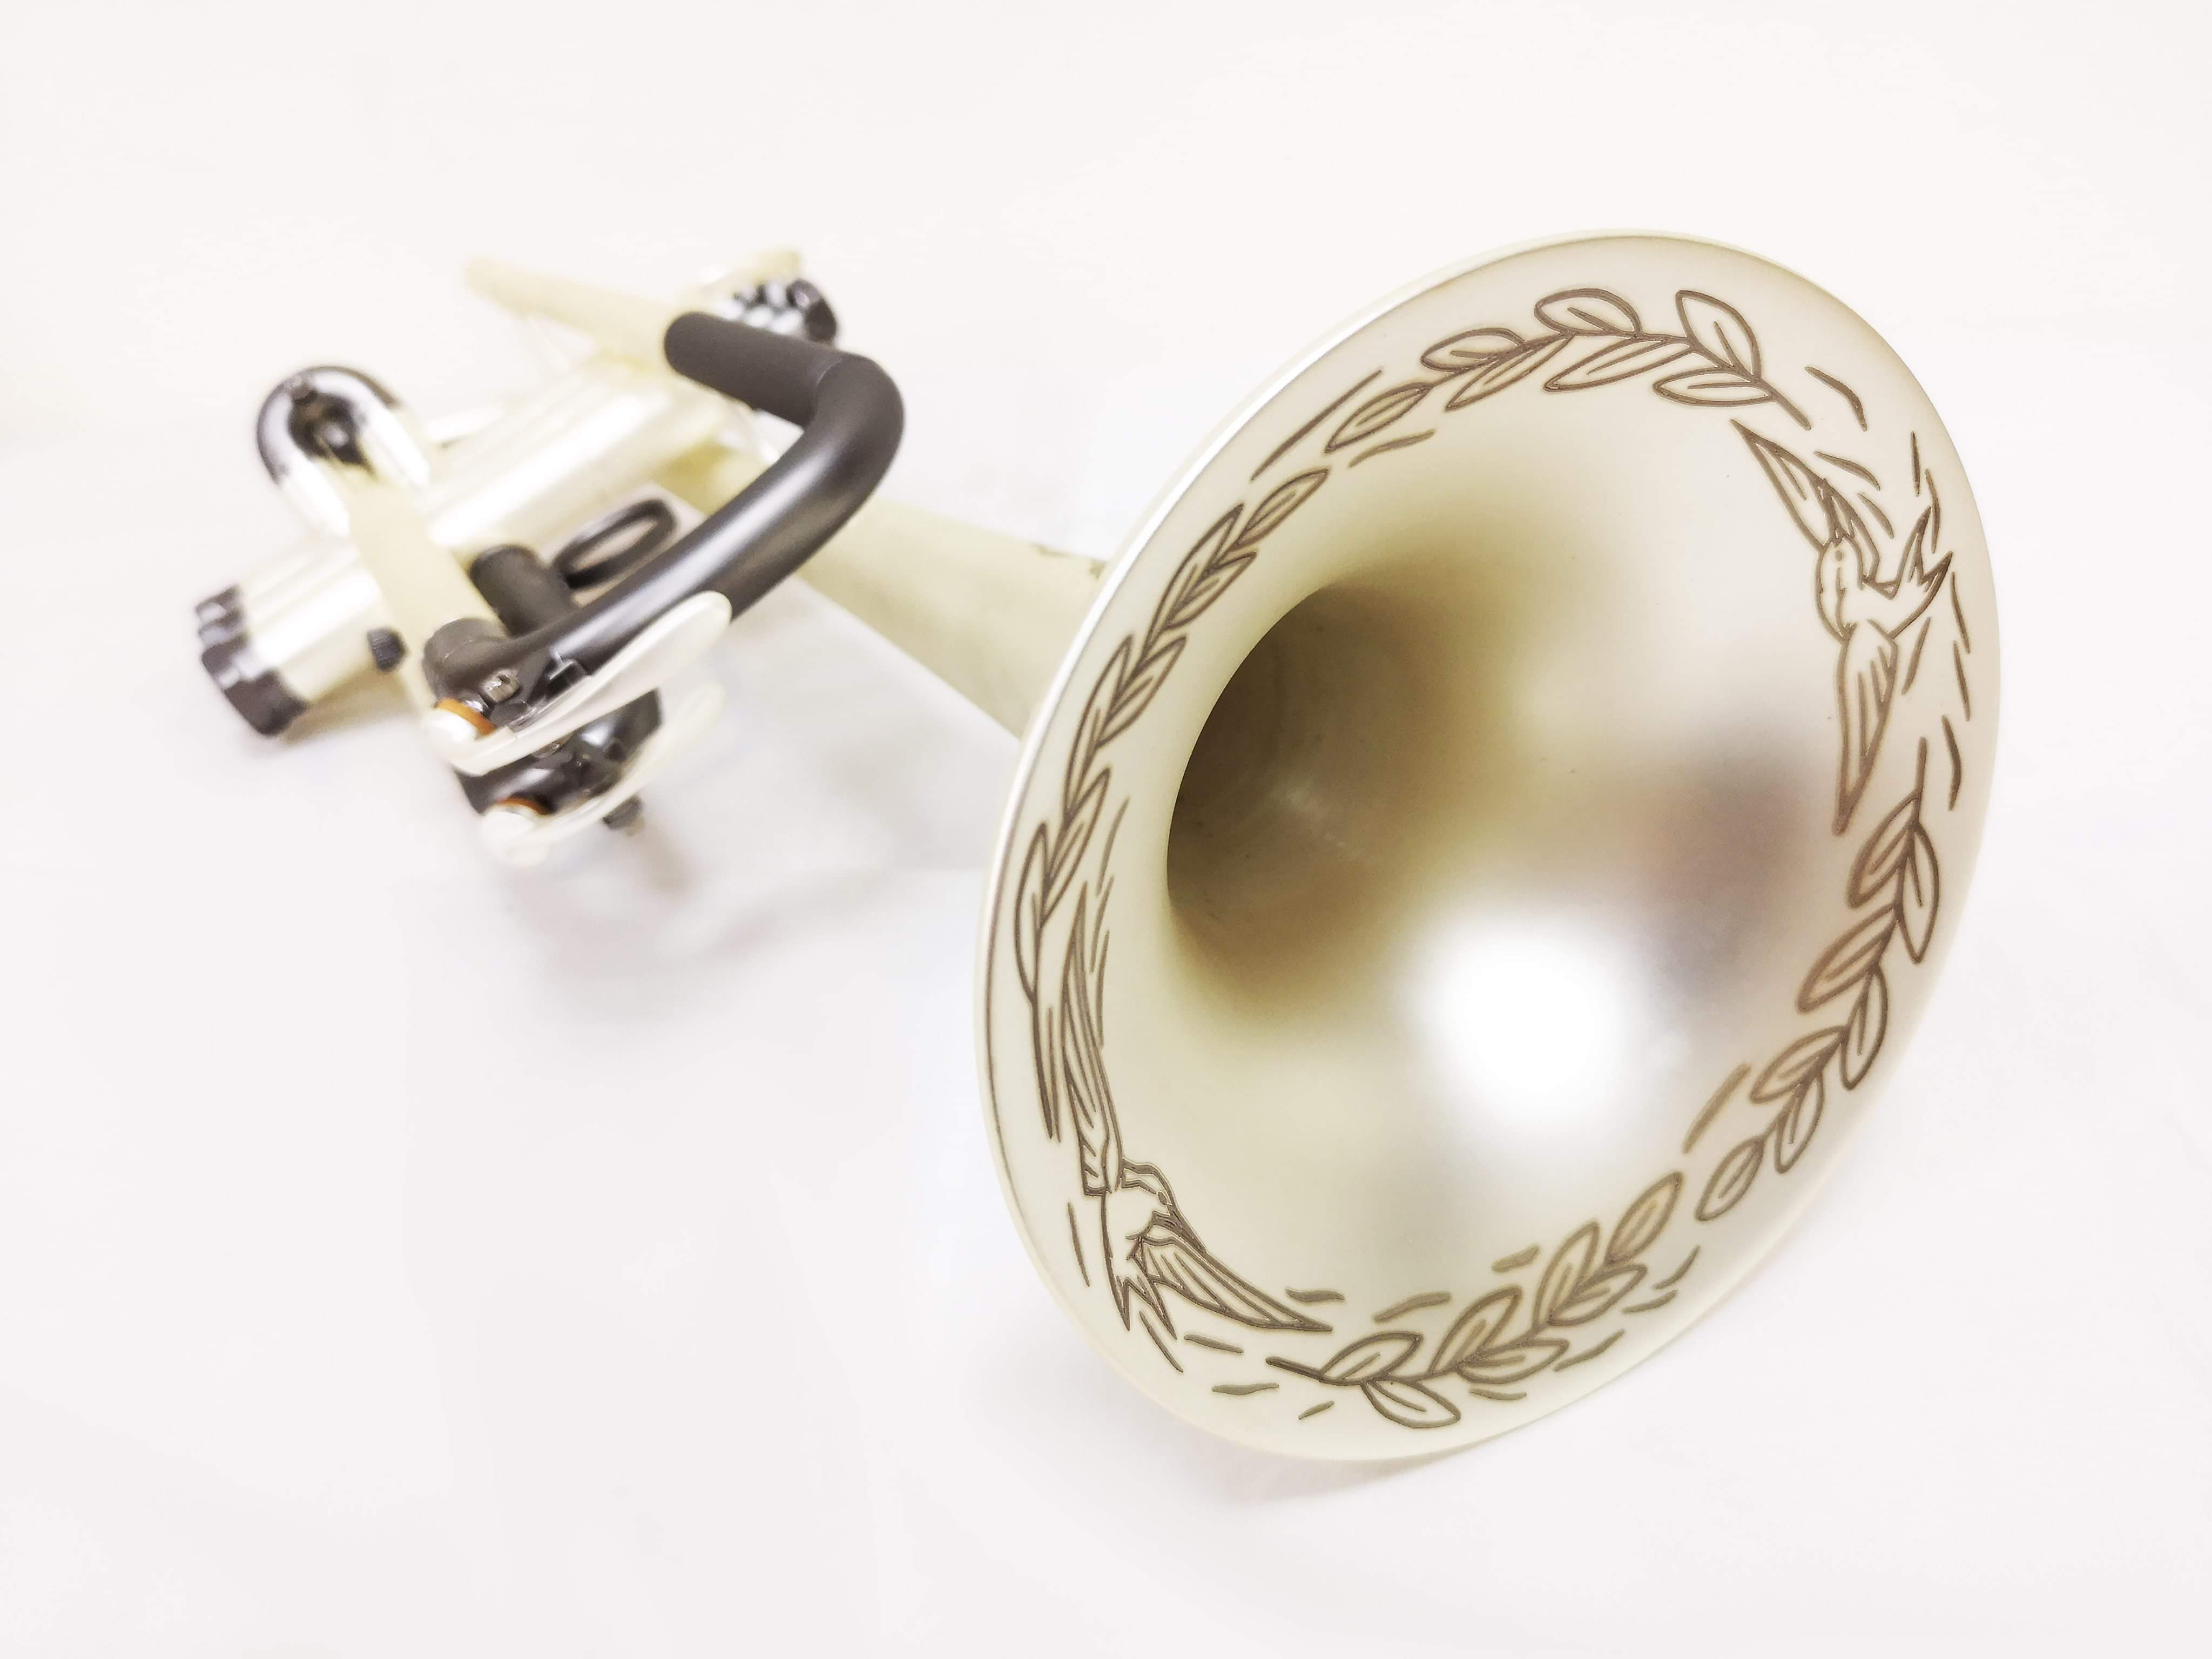 Trumpets – Victory Musical Instruments